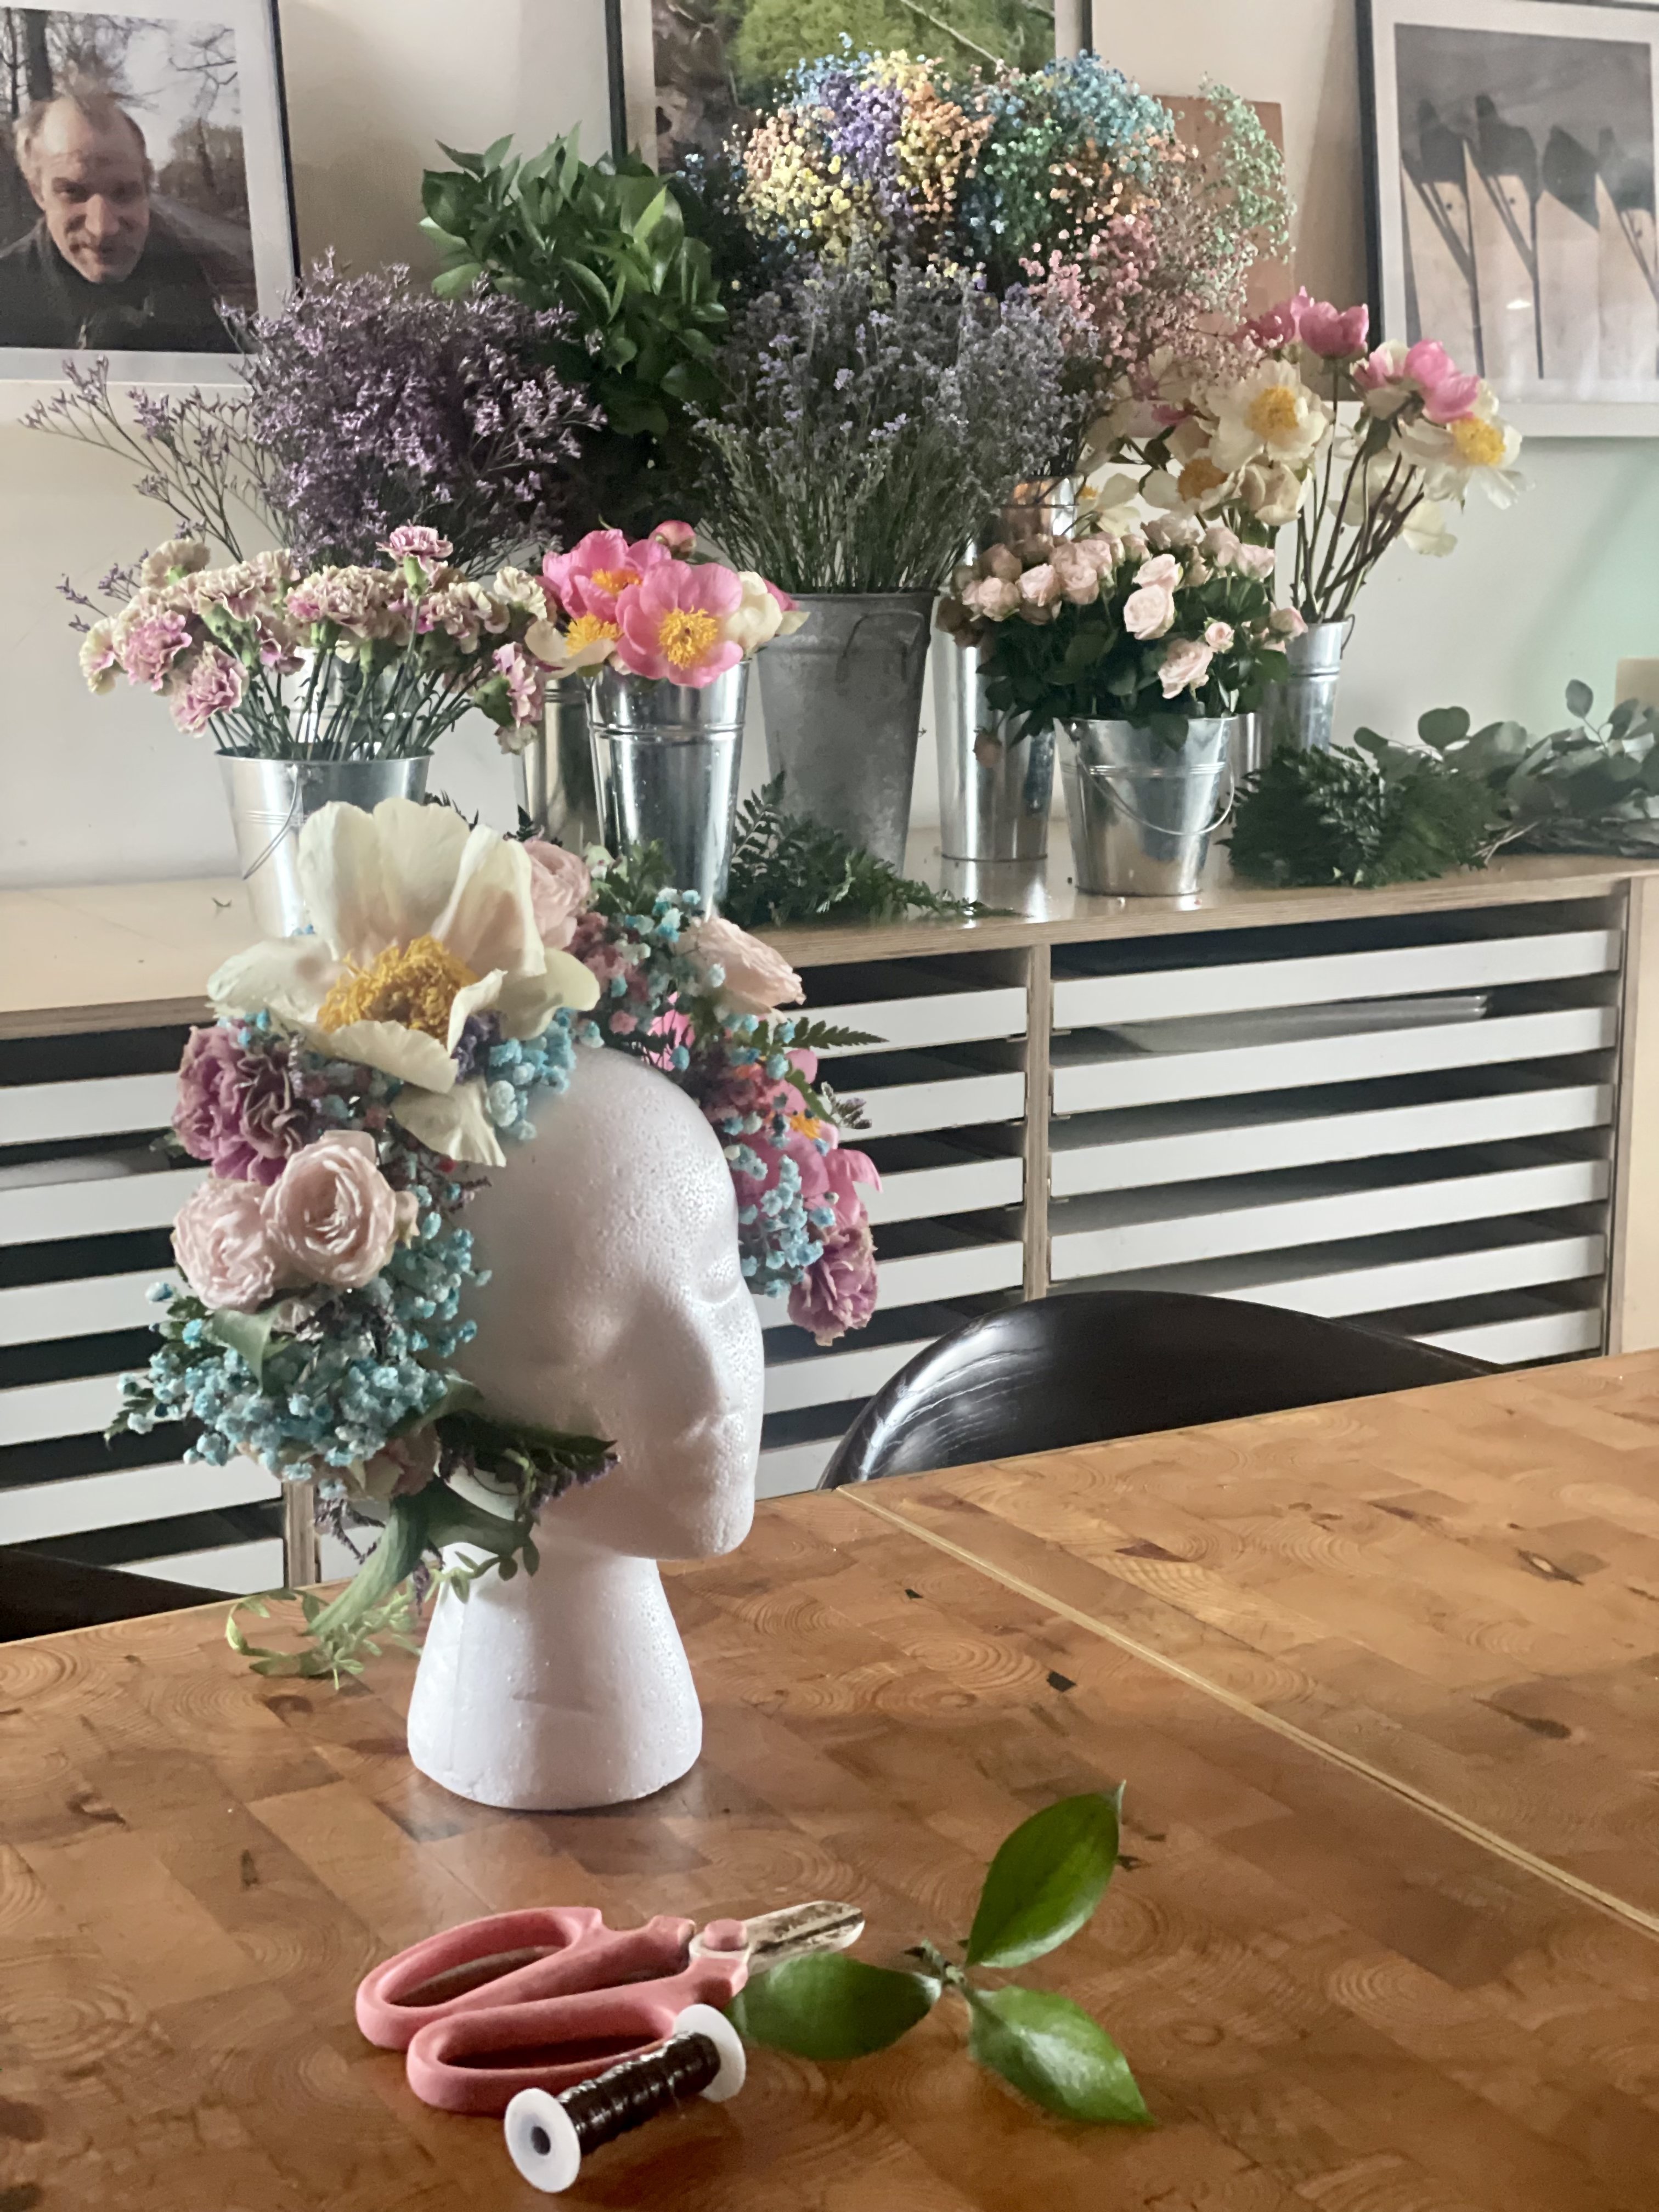 Flower Crown workshop at Copper Beech Cafe, Dulwich